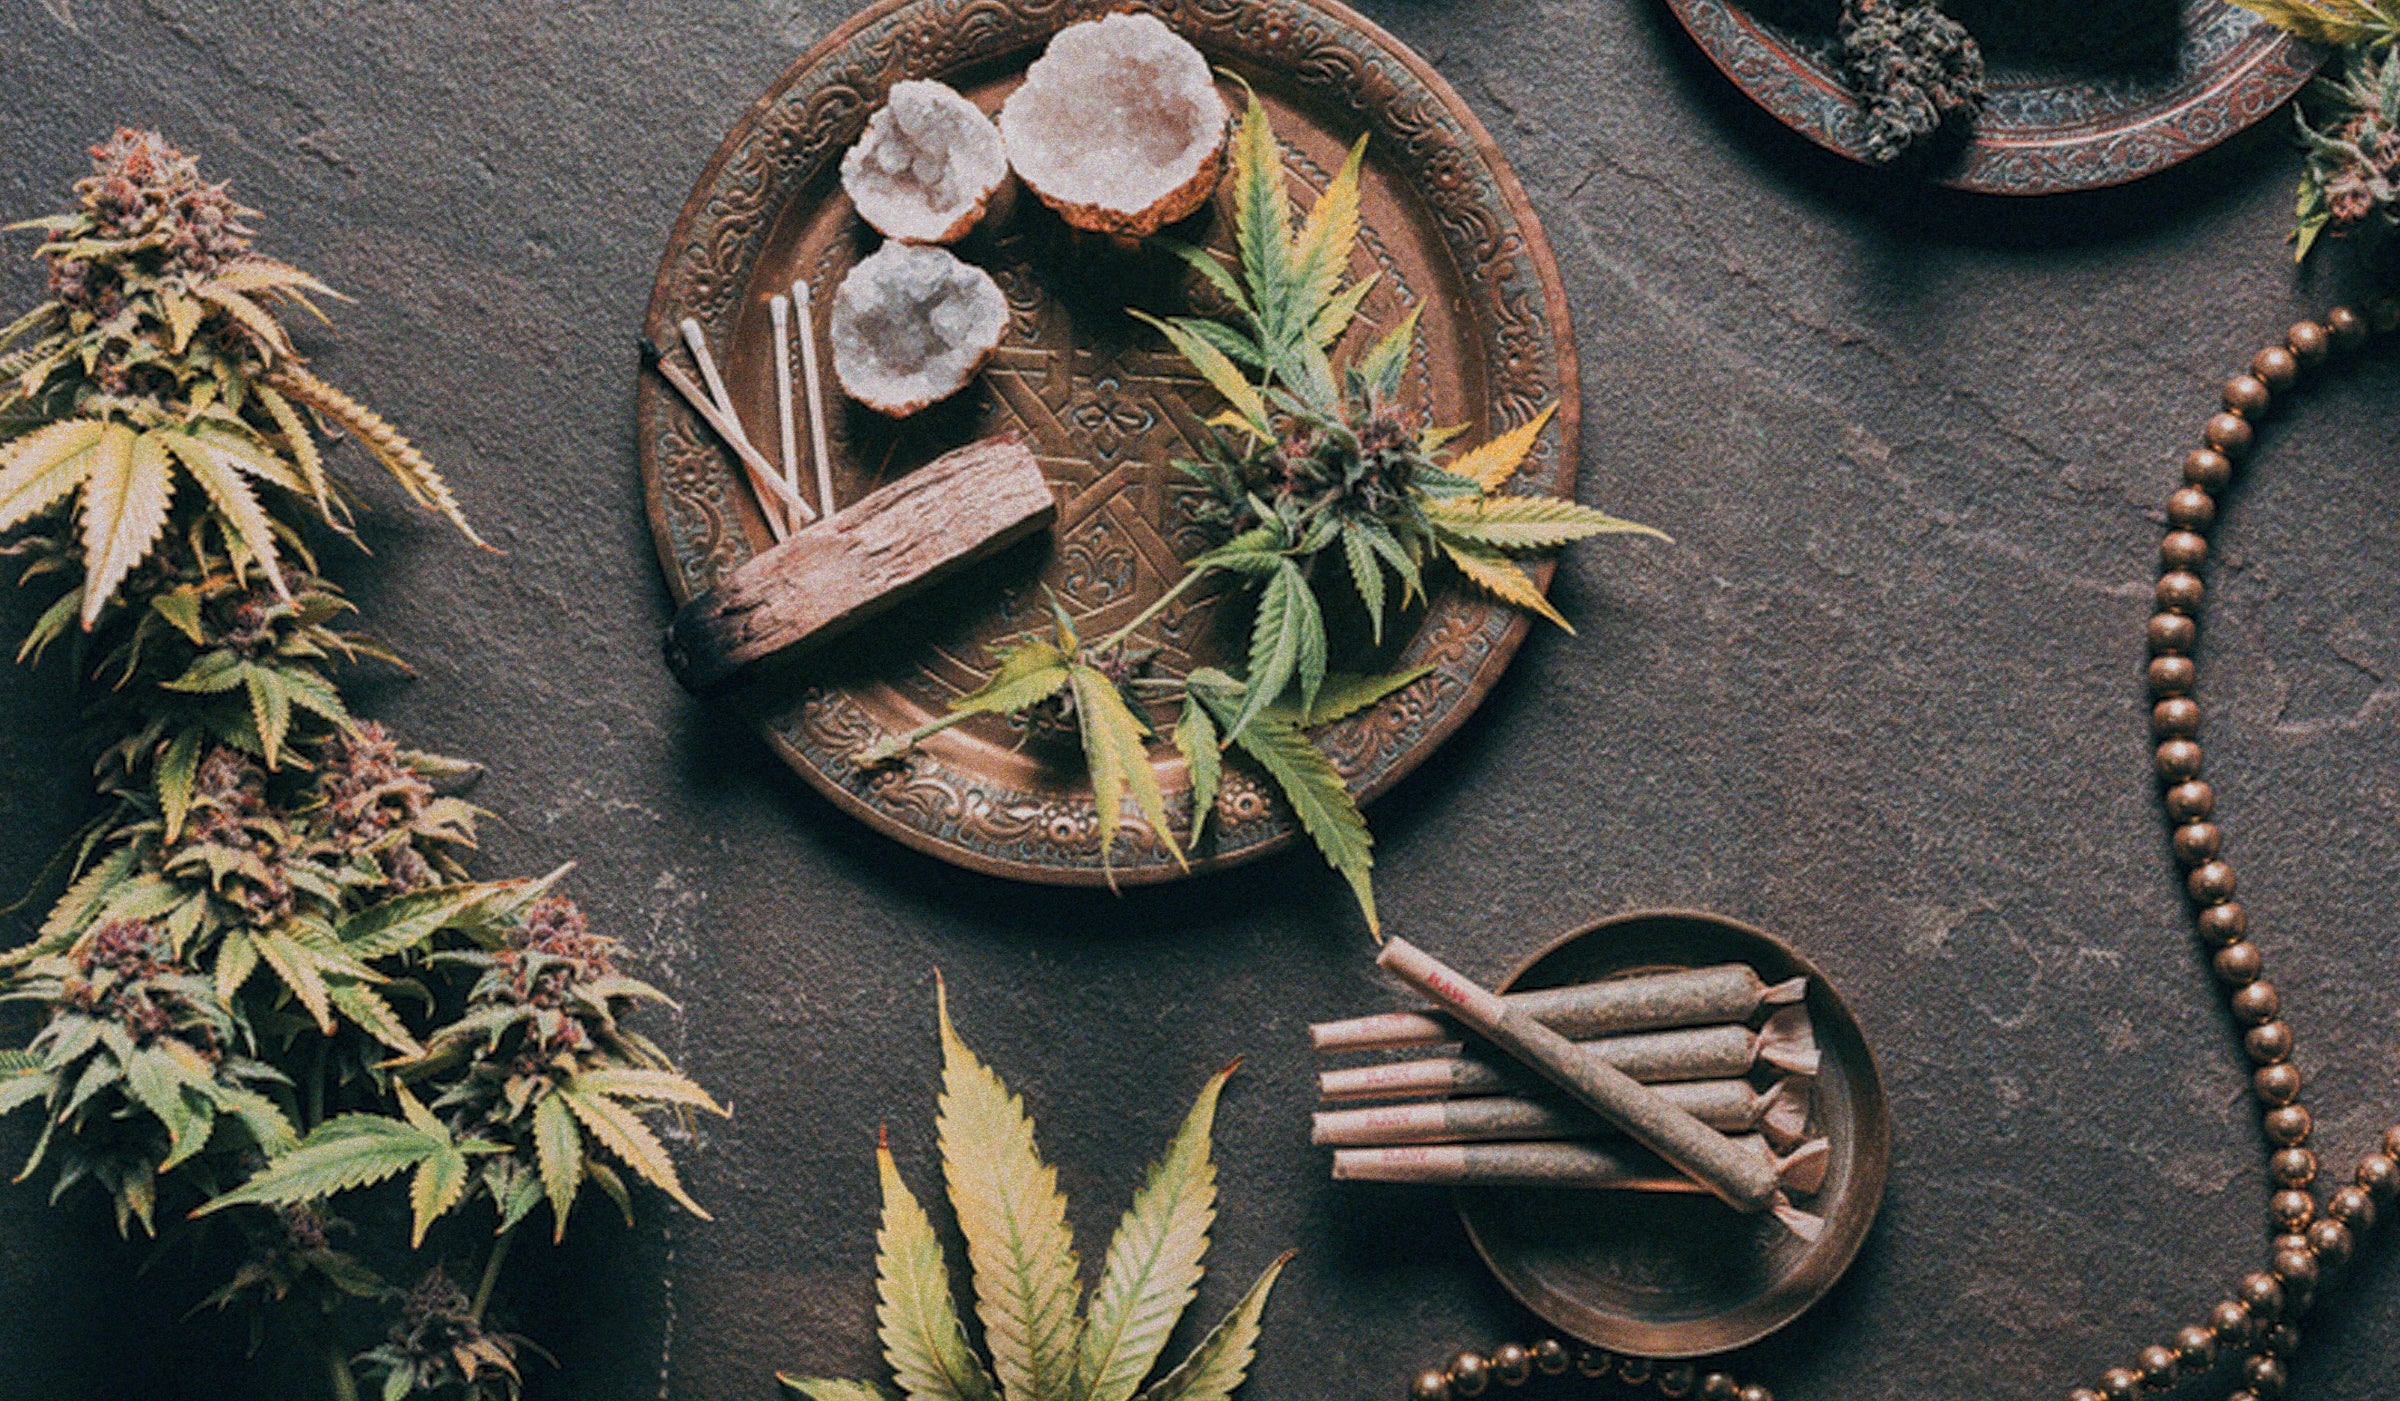 Elevated essentials: A captivating flatlay featuring plates on a dark table adorned with crystals, sage, pre-rolls, and a display of cannabis flowers and leaves.